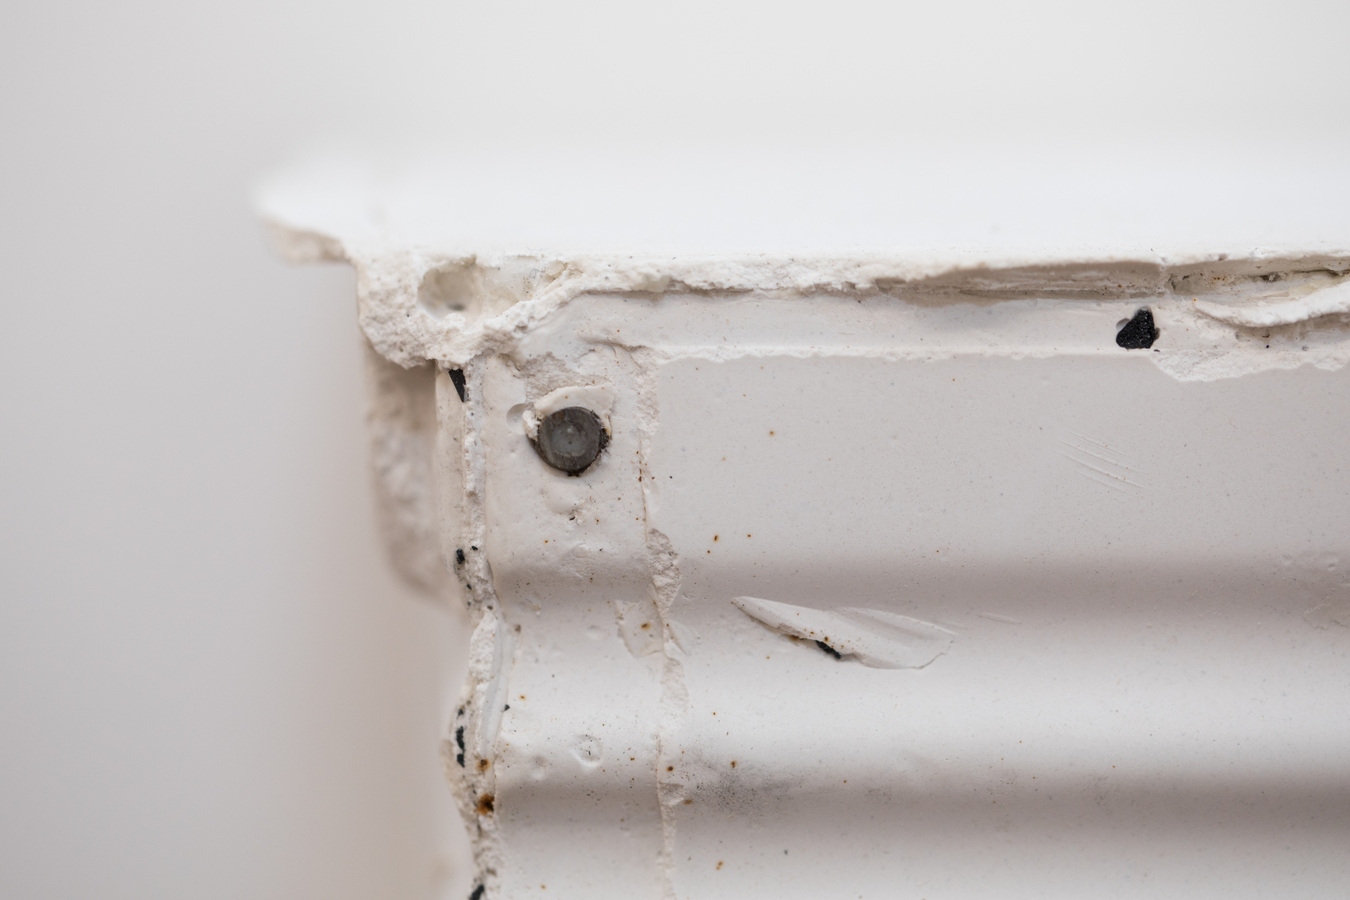 Image: Fiona Connor, Untitled (mailbox) #1-#8 (detail), 2021. Photo: Janneth Gil.